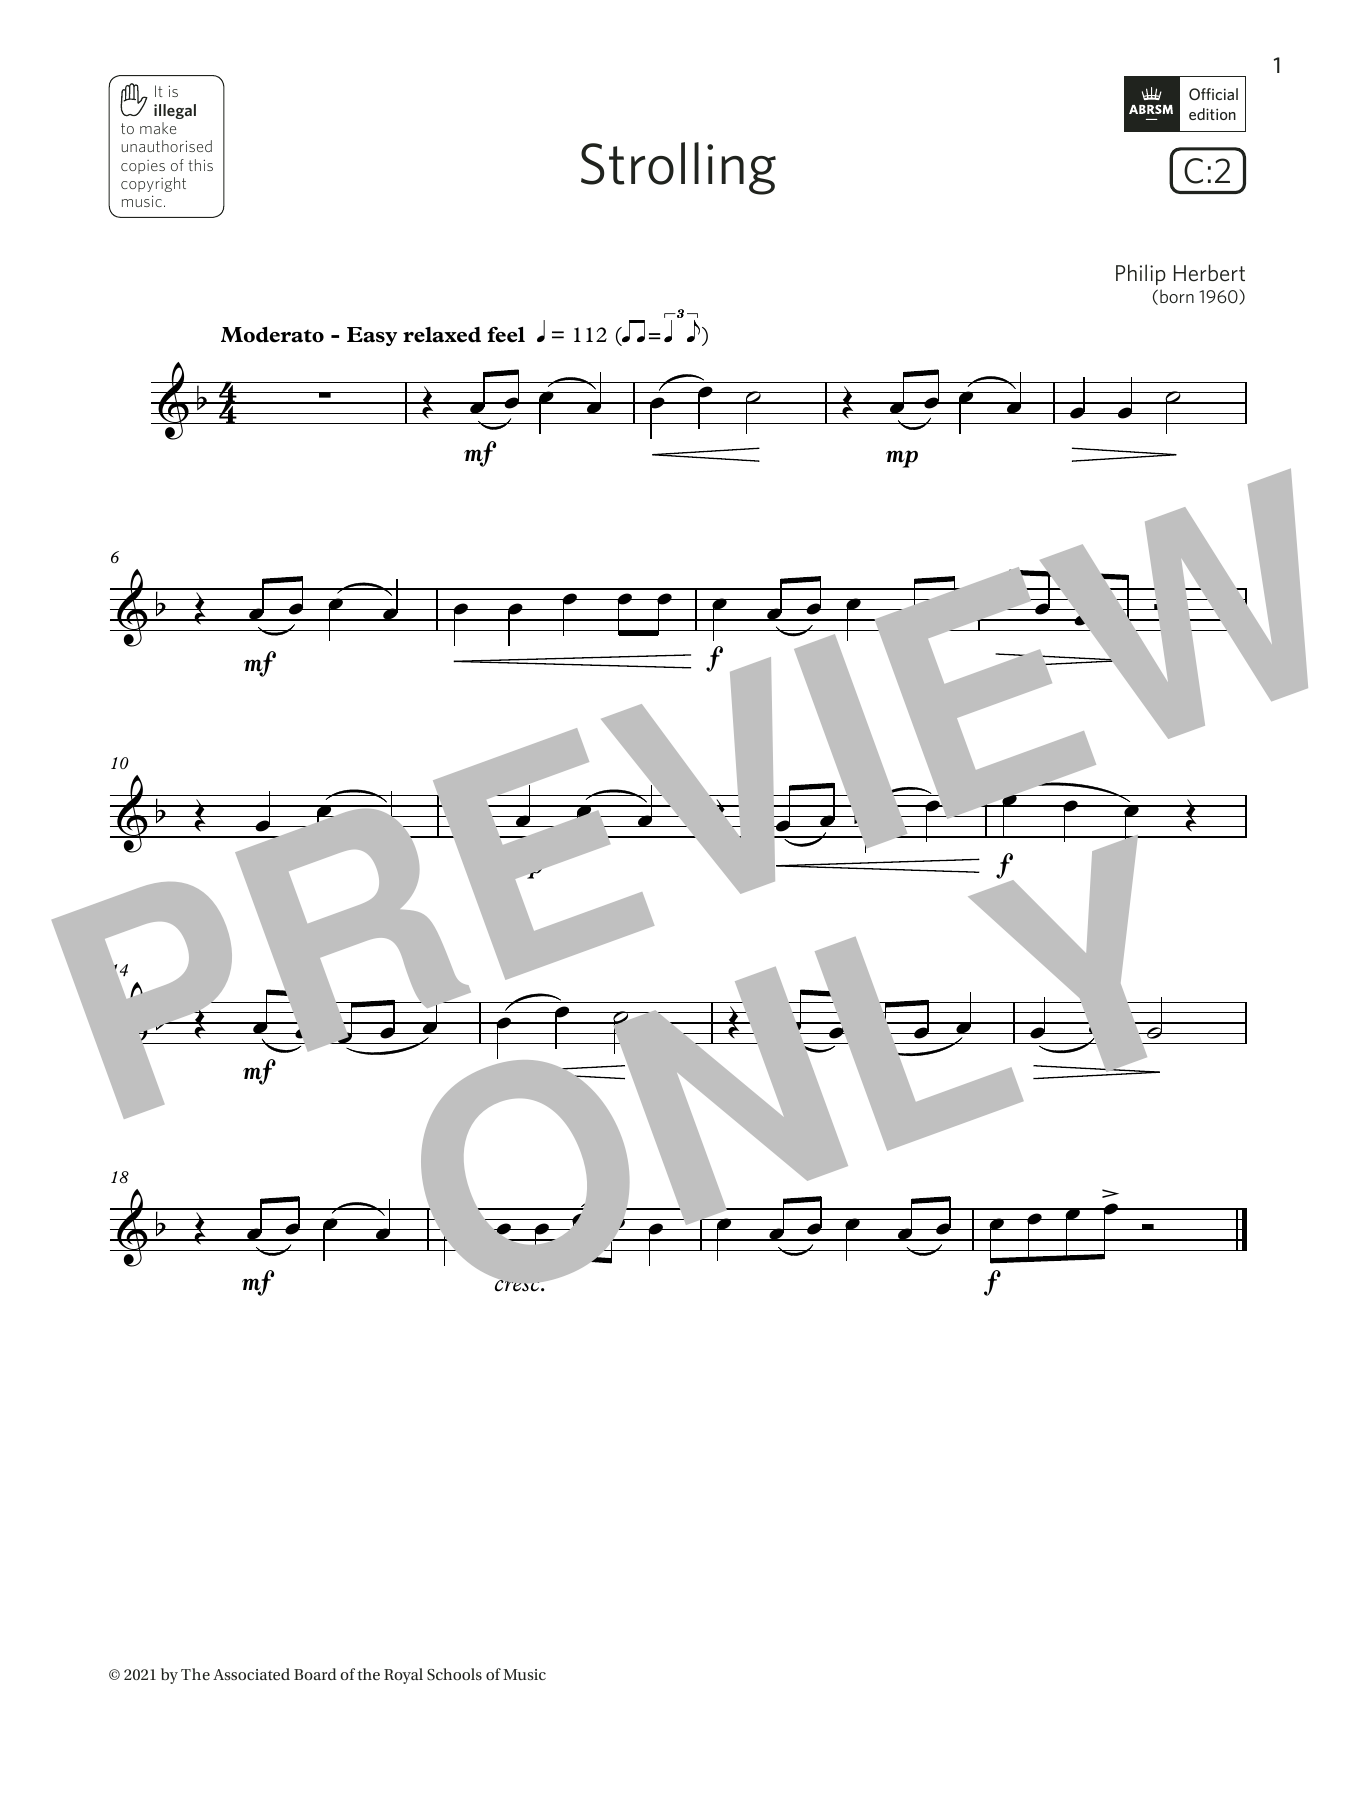 Download Philip Herbert Strolling (Grade 1 List C2 from the ABR Sheet Music